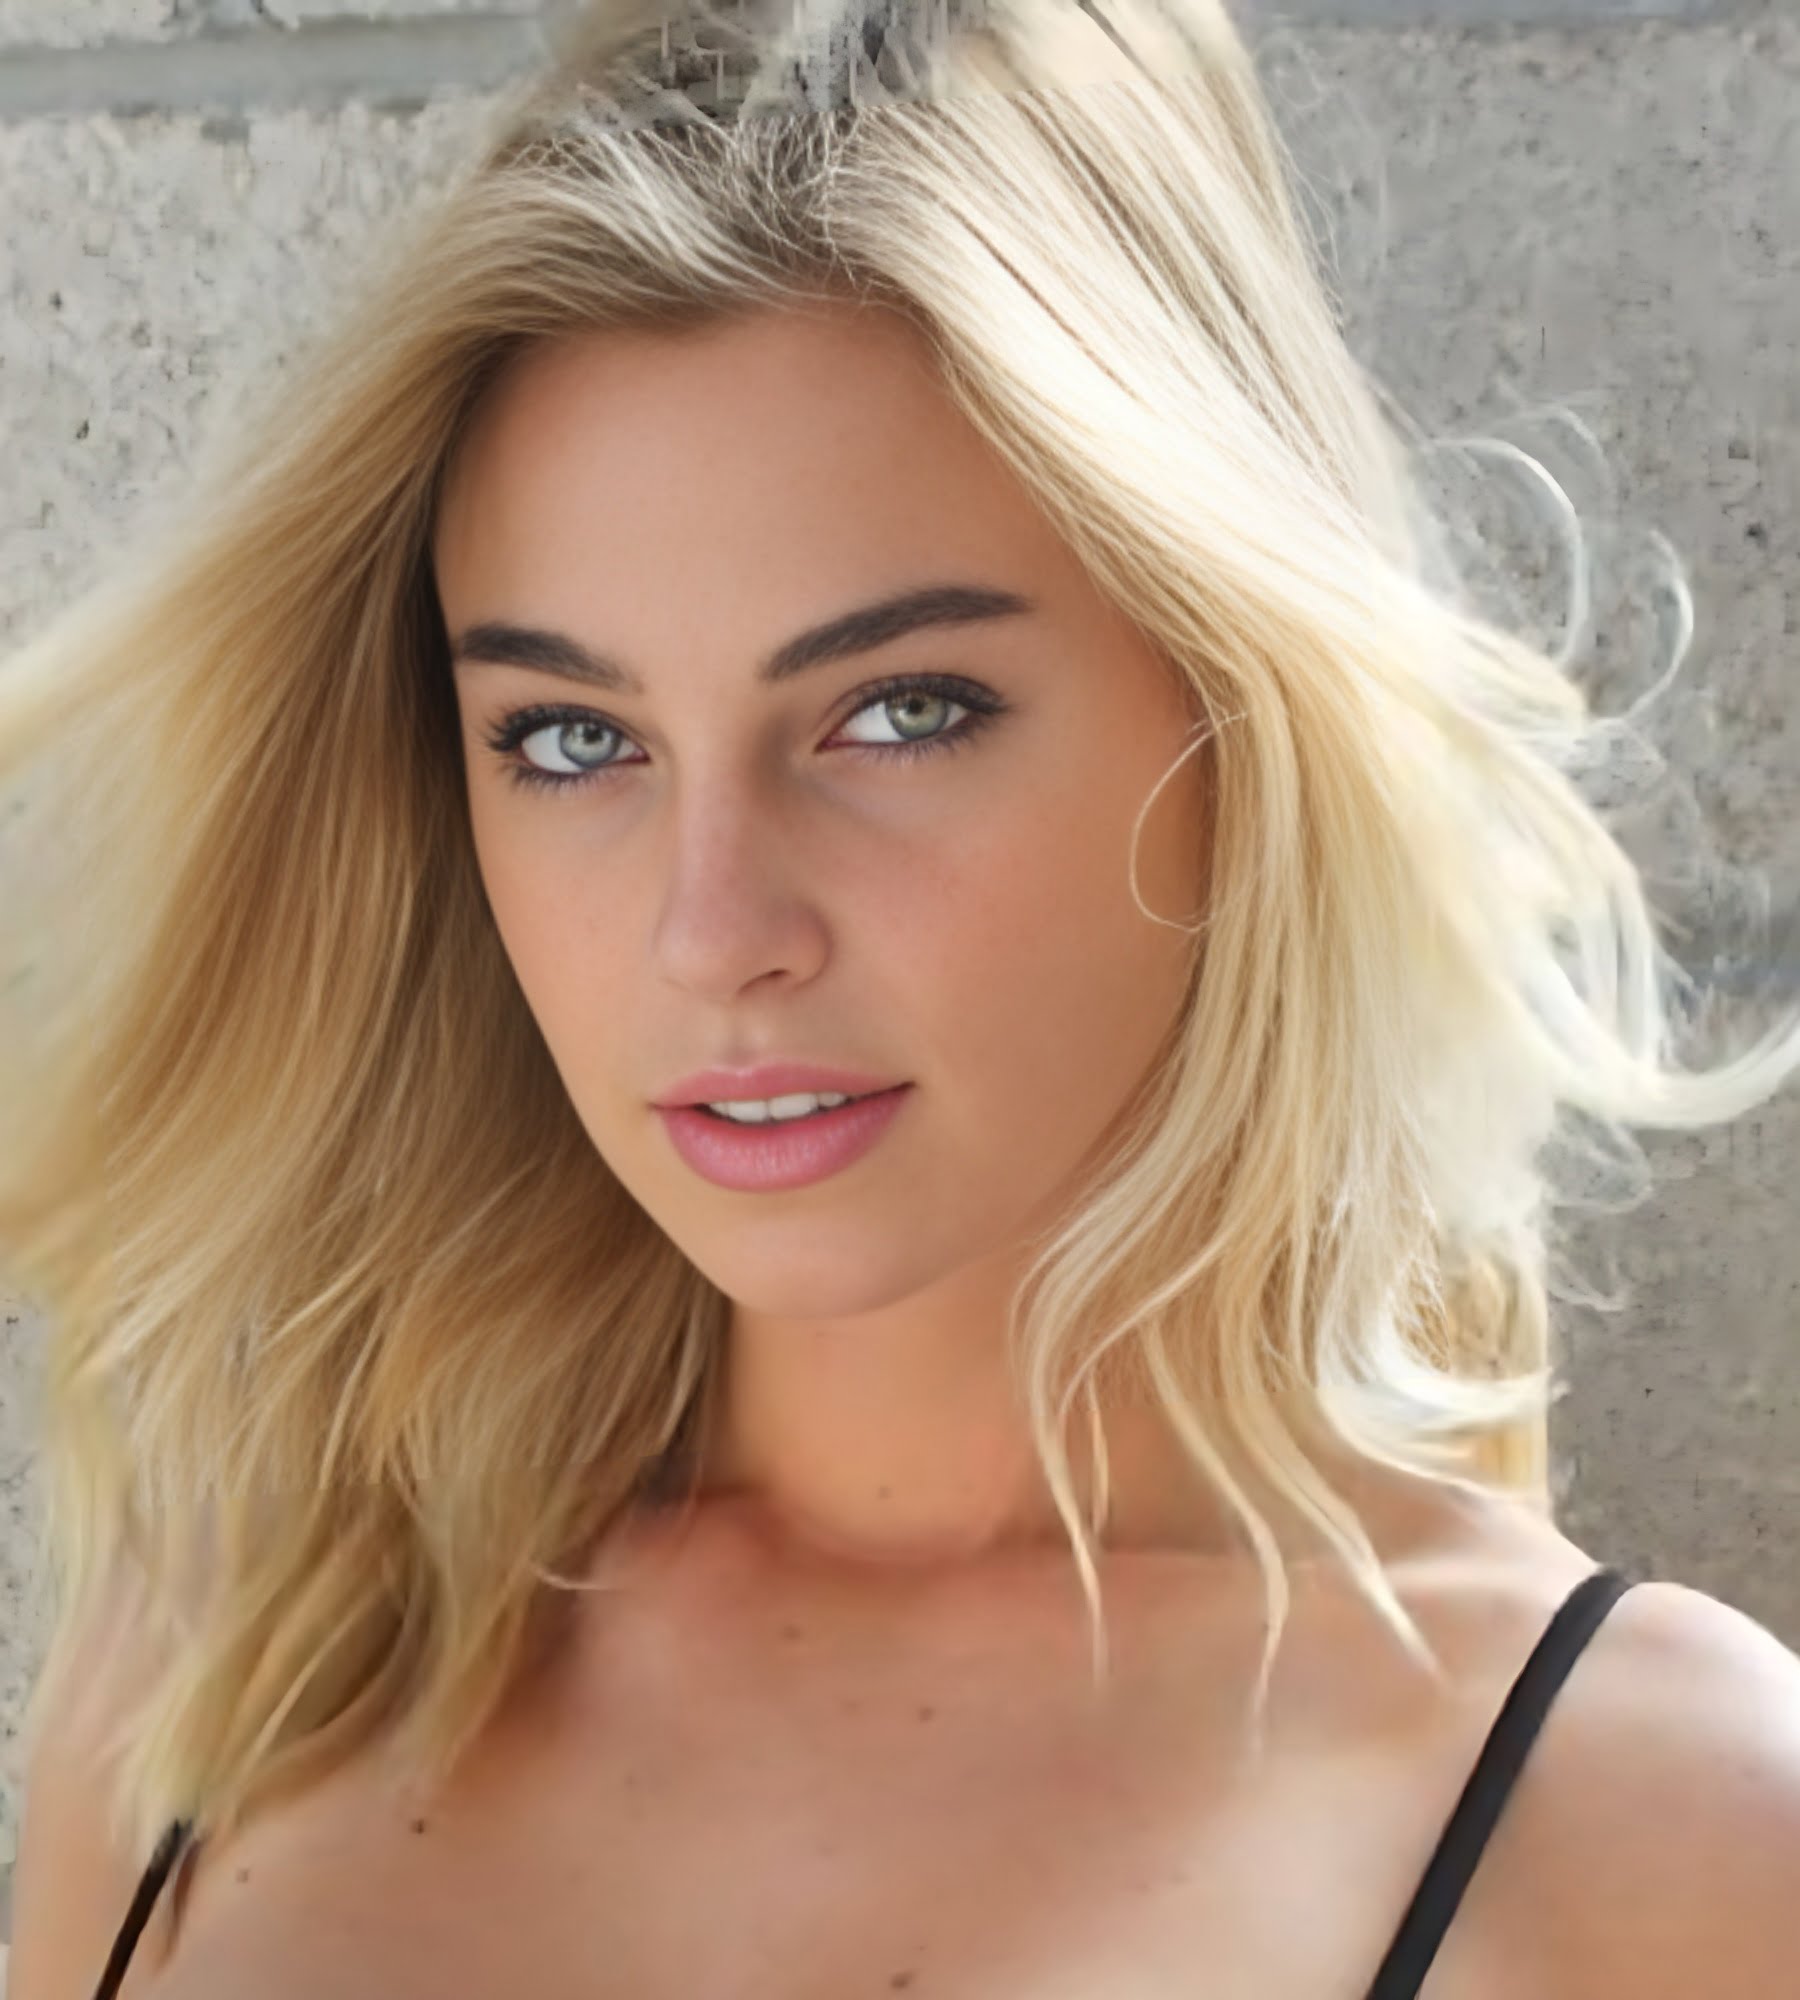 Elizabeth Turner Actress Age Biography Height Weight Wikipedia Videos And More 8163